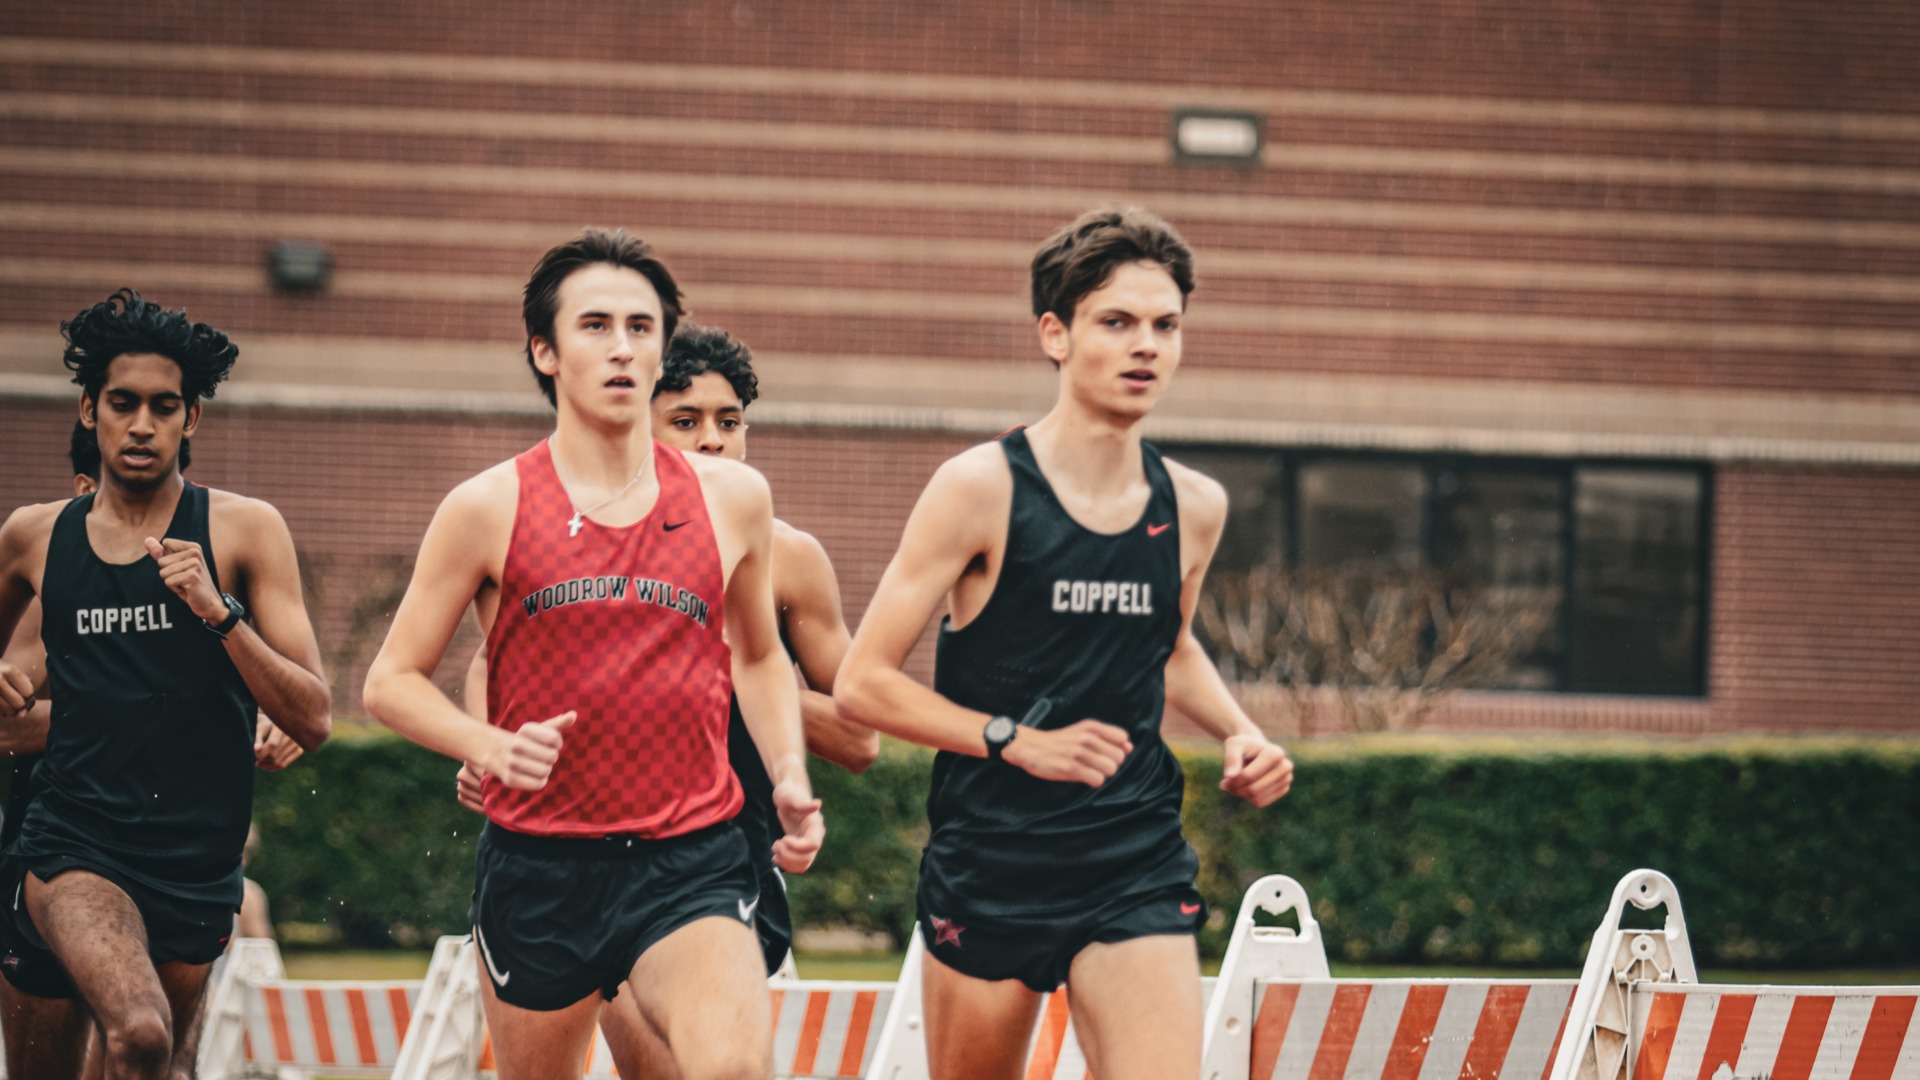 Coppell High SchoolSlide 9 - BOYS TRACK HEADED TO REGIONALS